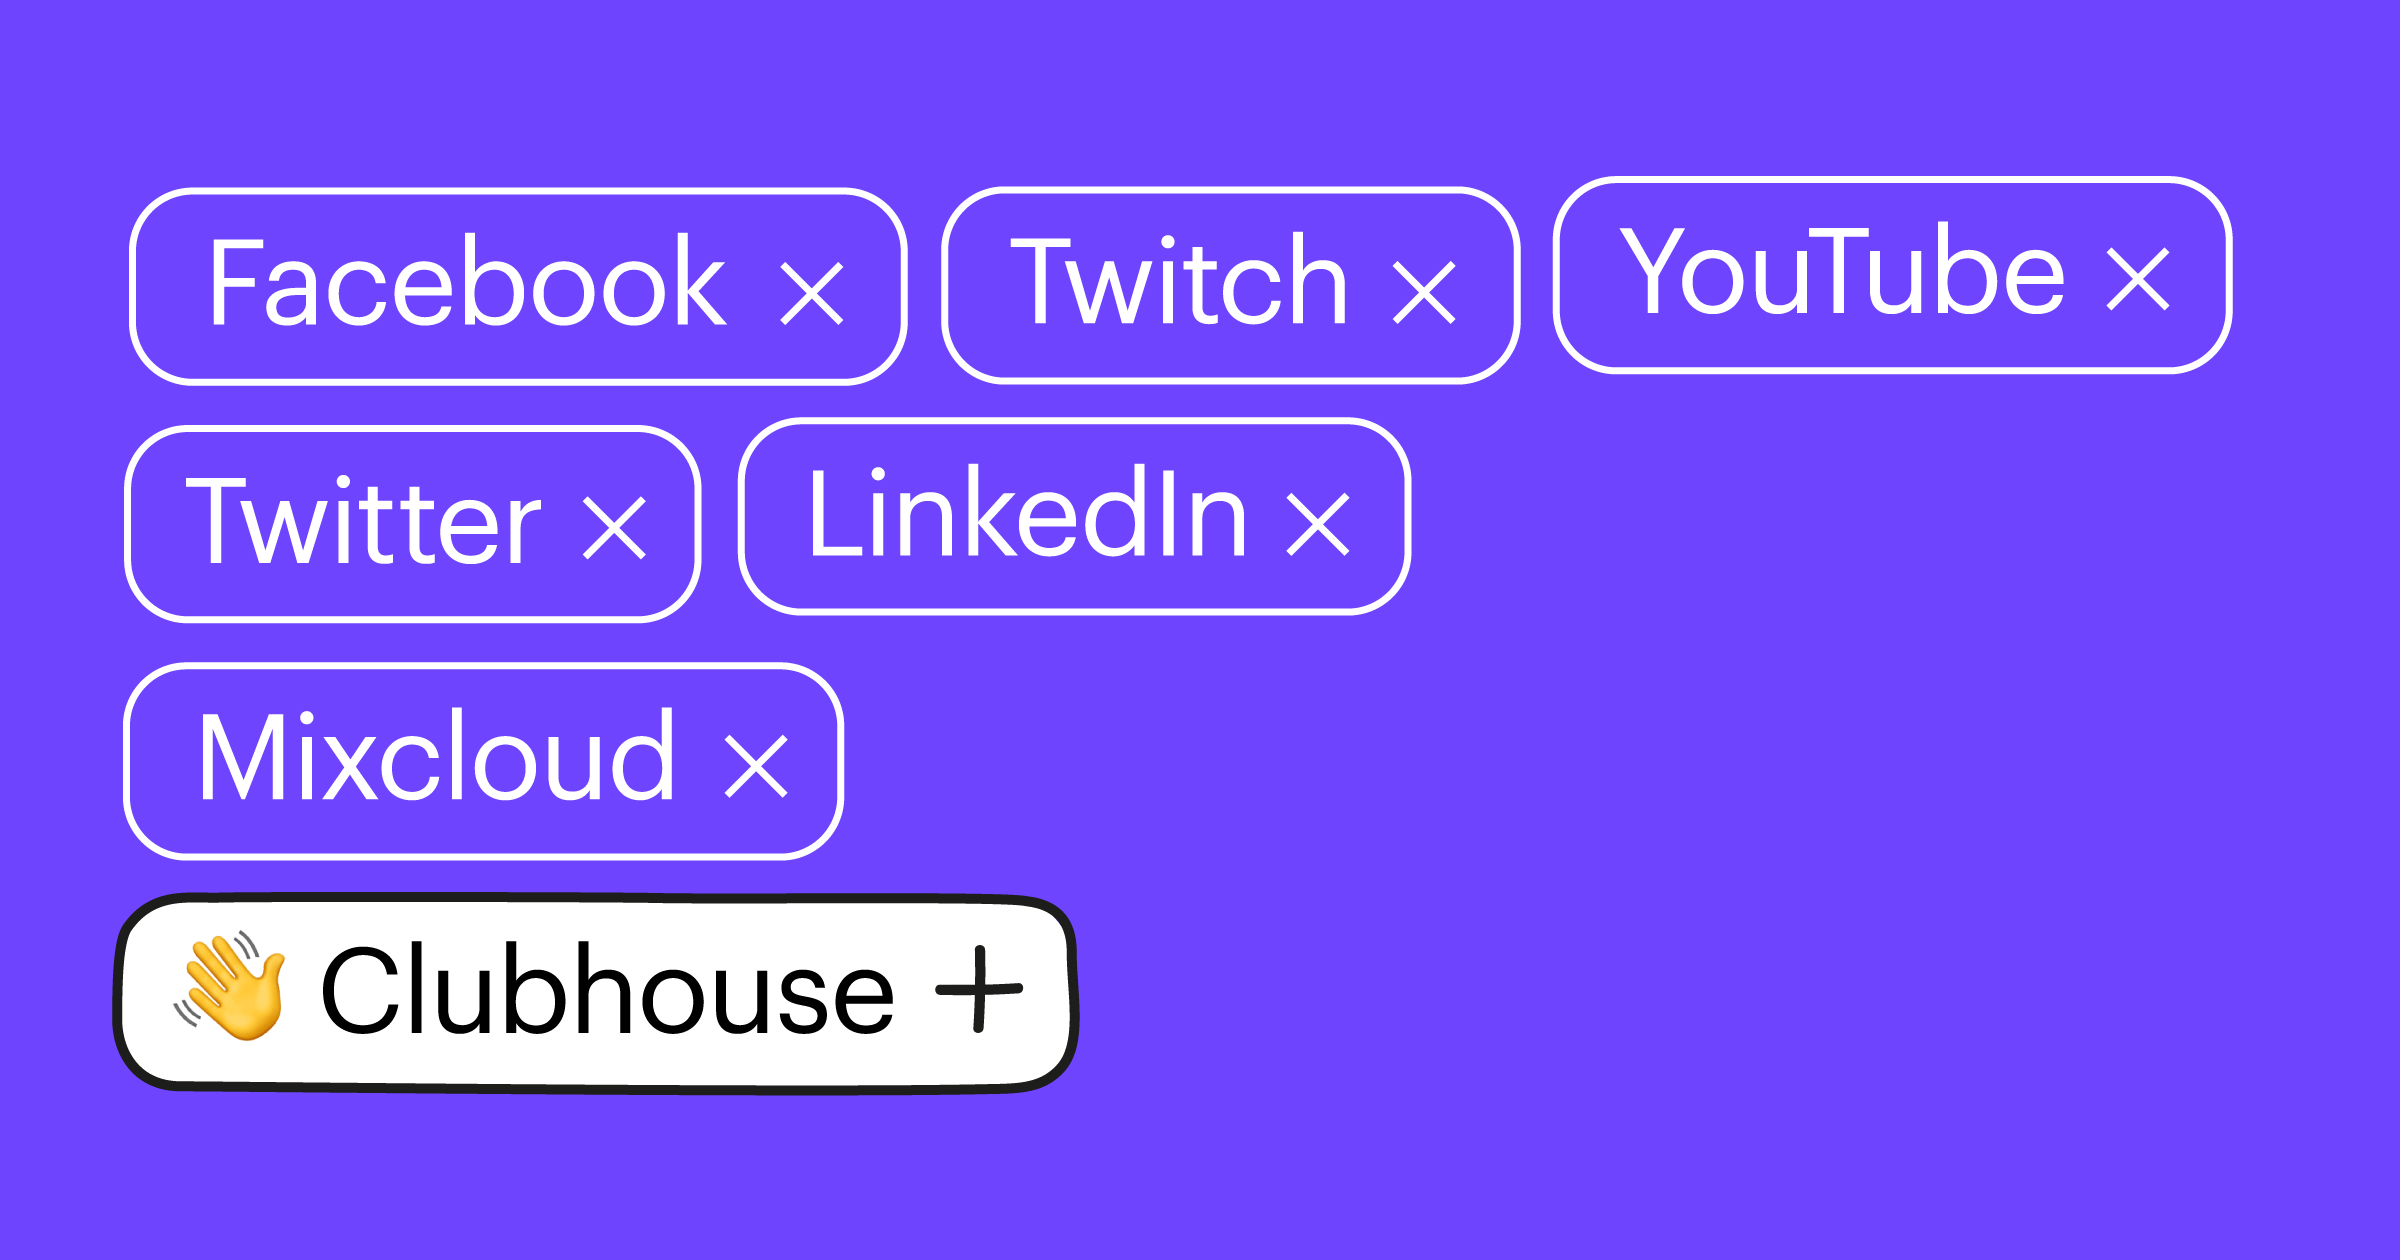 What is Clubhouse and why should live streamers use it?